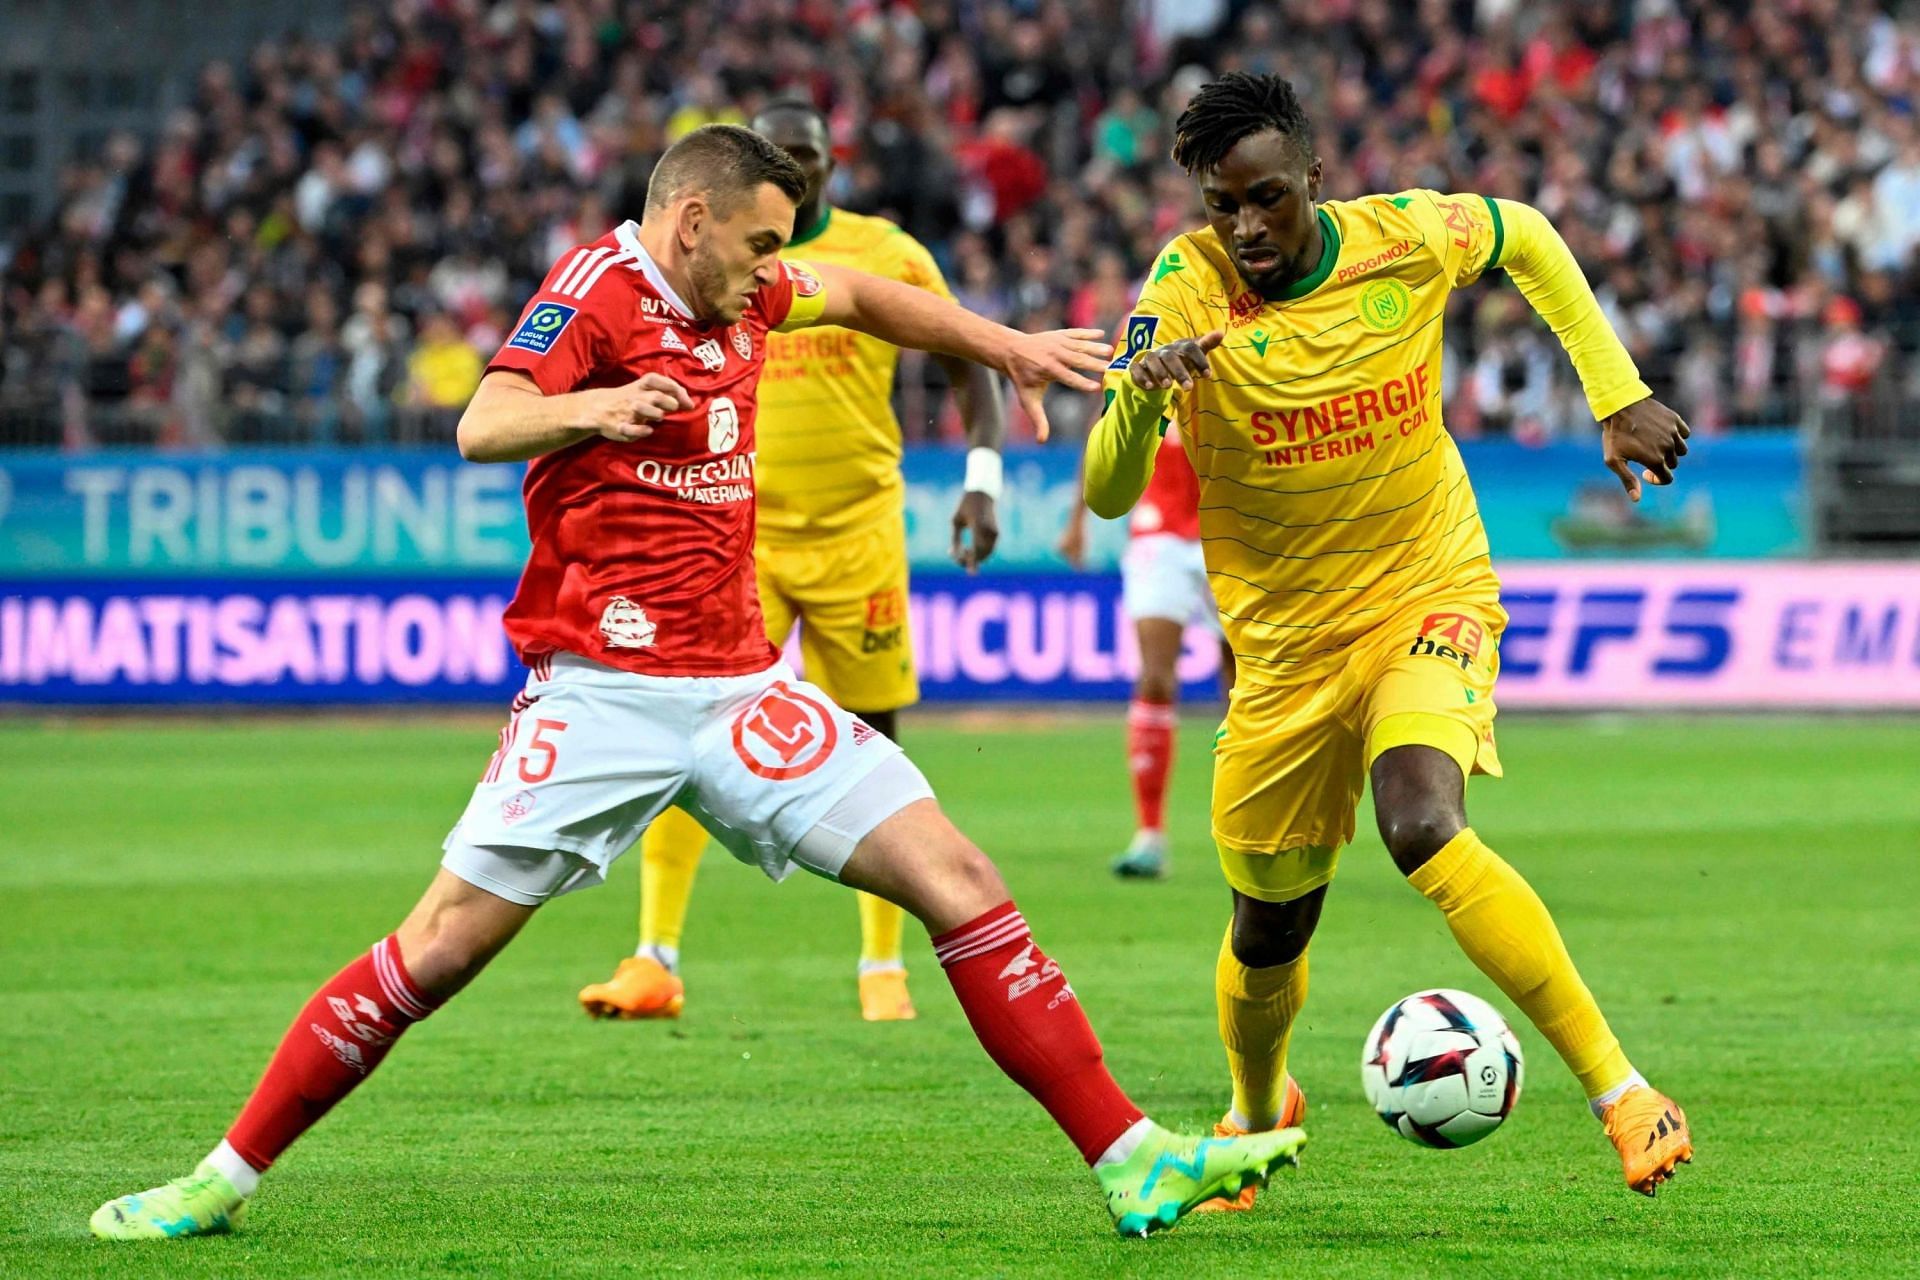 Nantes and Brest lock horns in the Ligue 1 on Sunday